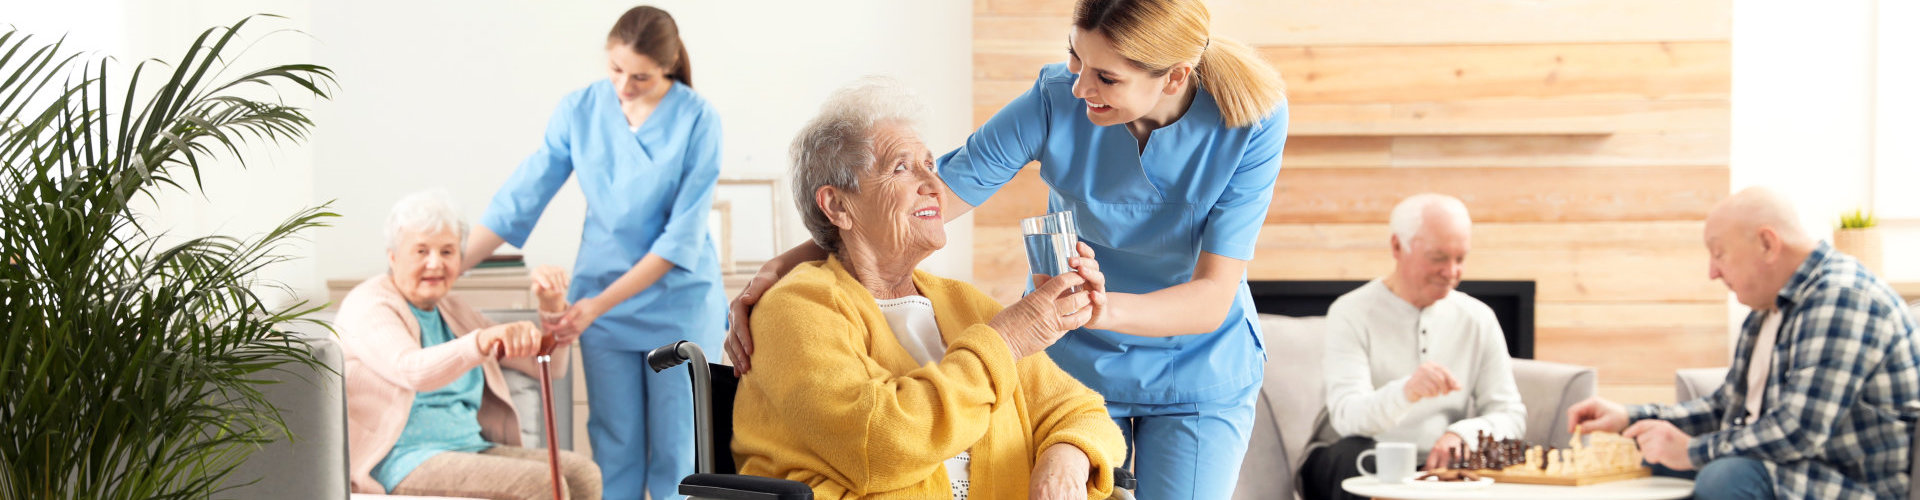 caregiver giving water to old woman